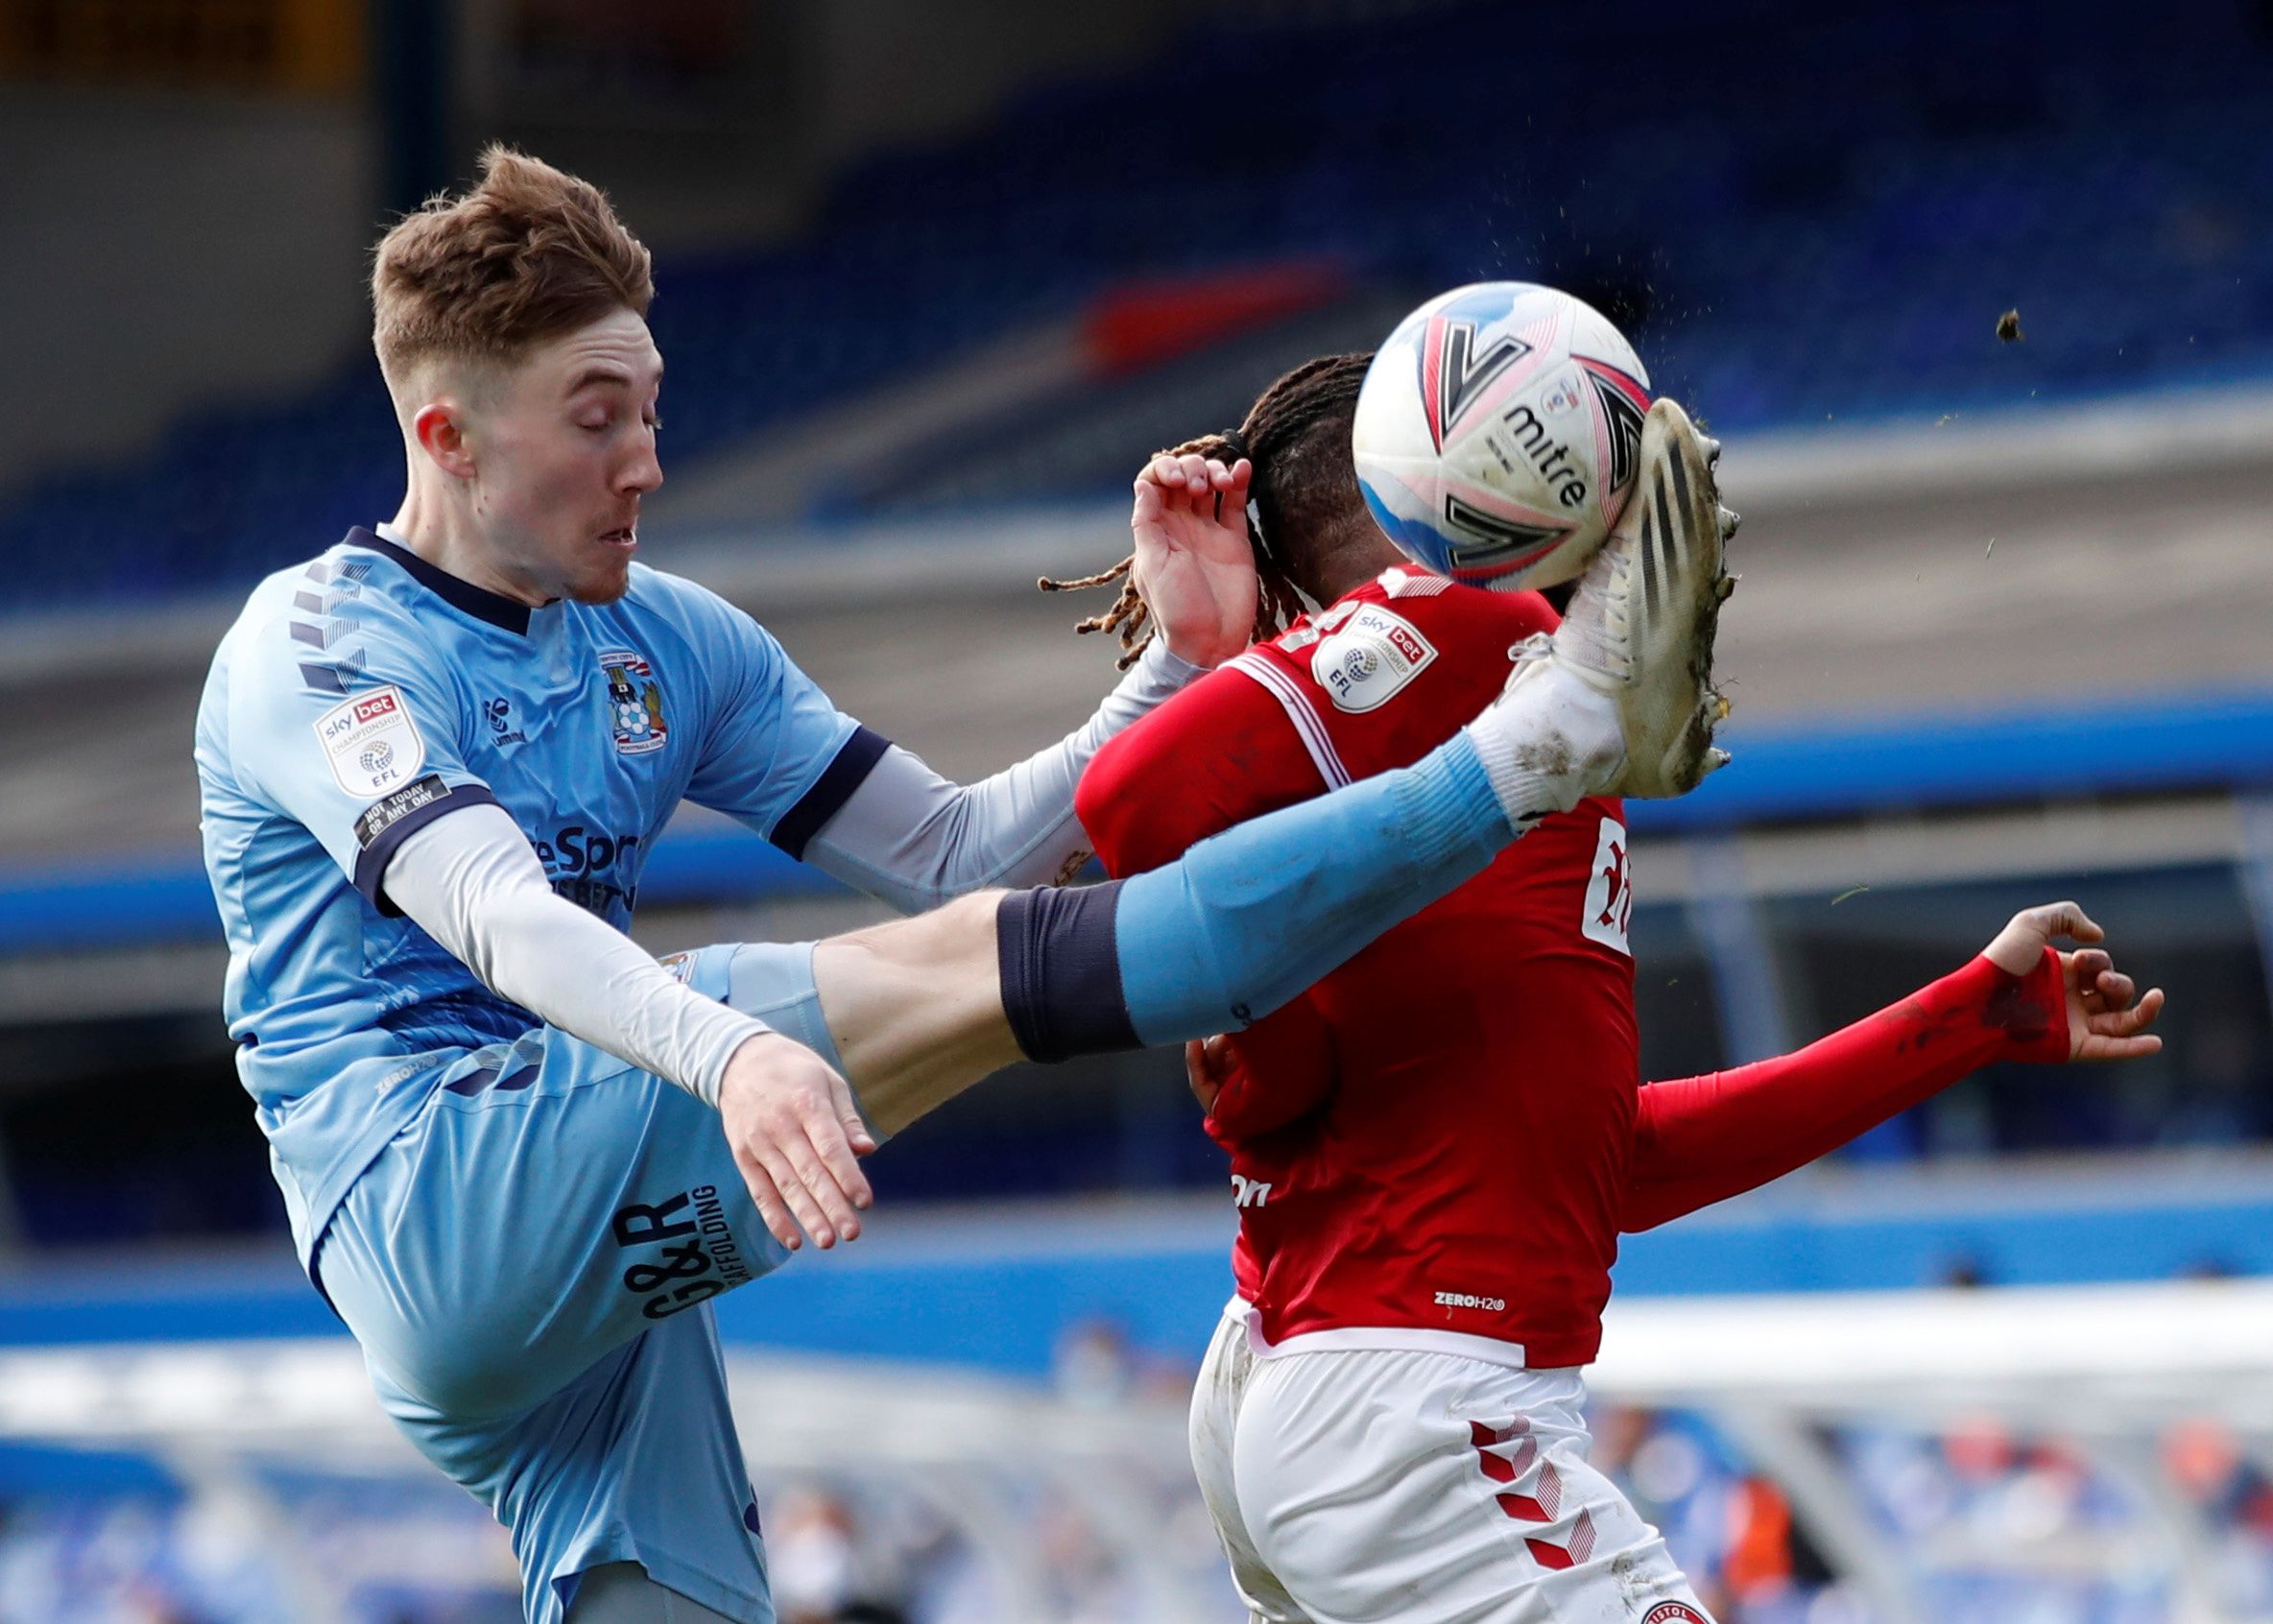 Soccer Football - Championship - Coventry City v Bristol City - St Andrew's, Birmingham, Britain - April 5, 2021  Coventry City's Josh Eccles in action with Bristol City's Kasey Palmer  Action Images/Andrew Boyers  EDITORIAL USE ONLY. No use with unauthorized audio, video, data, fixture lists, club/league logos or 